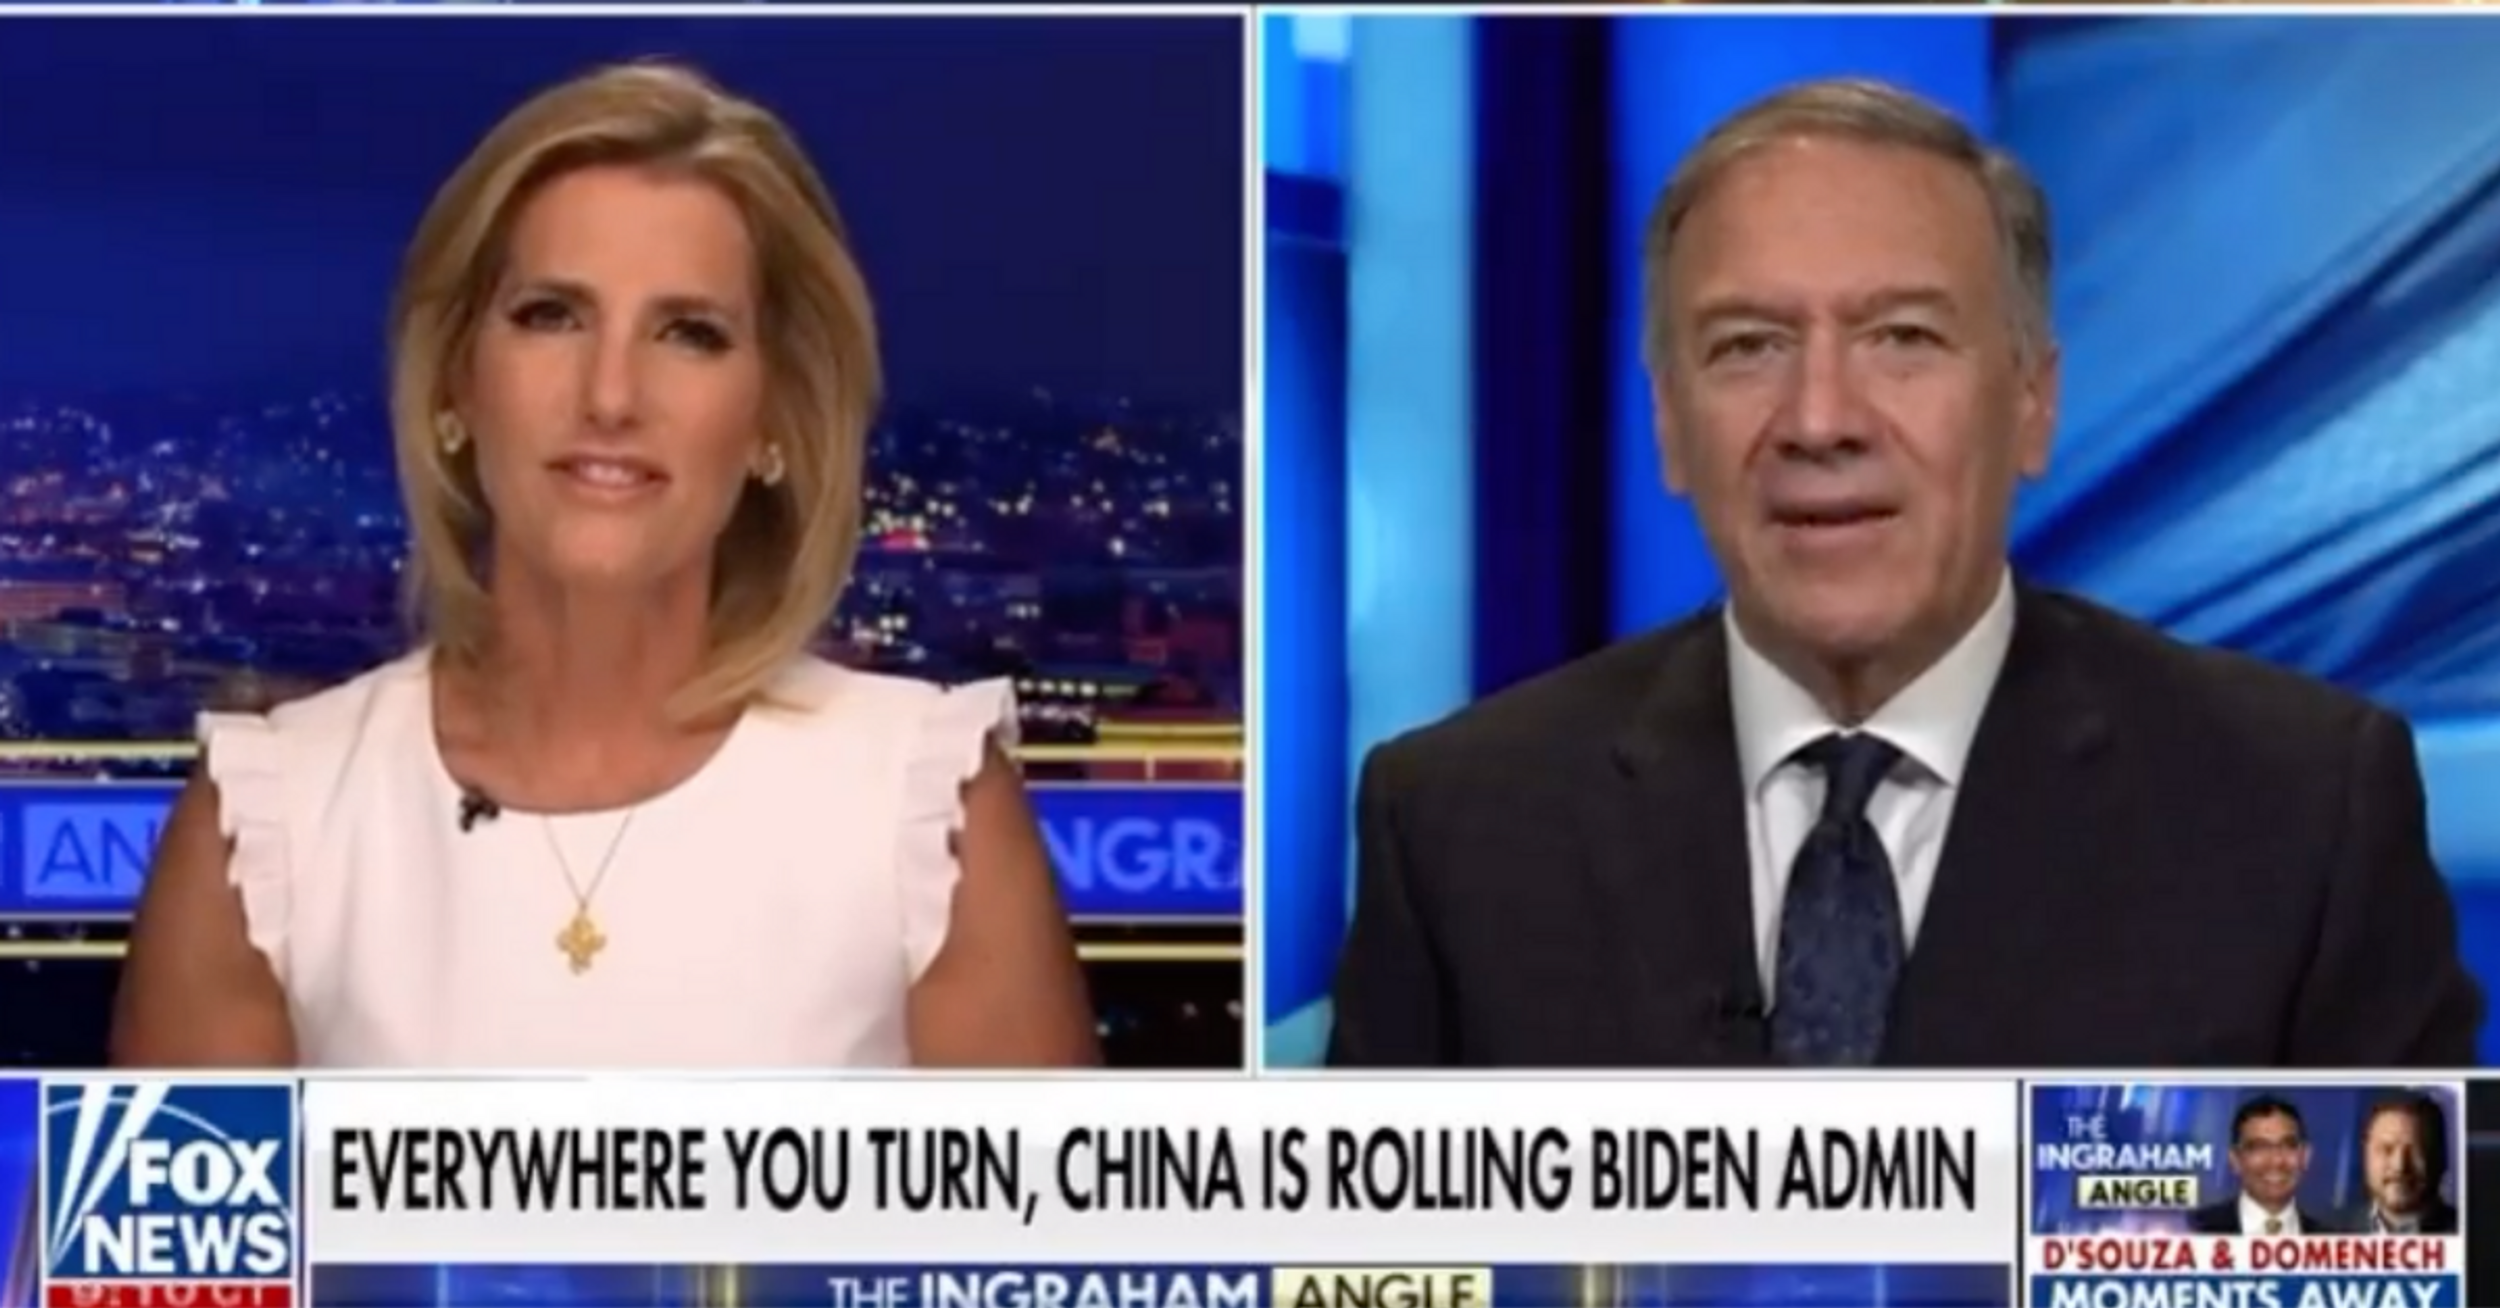 Mike Pompeo Roasted After Freudian Slip About 'Bigger Threat To America' On Fox News